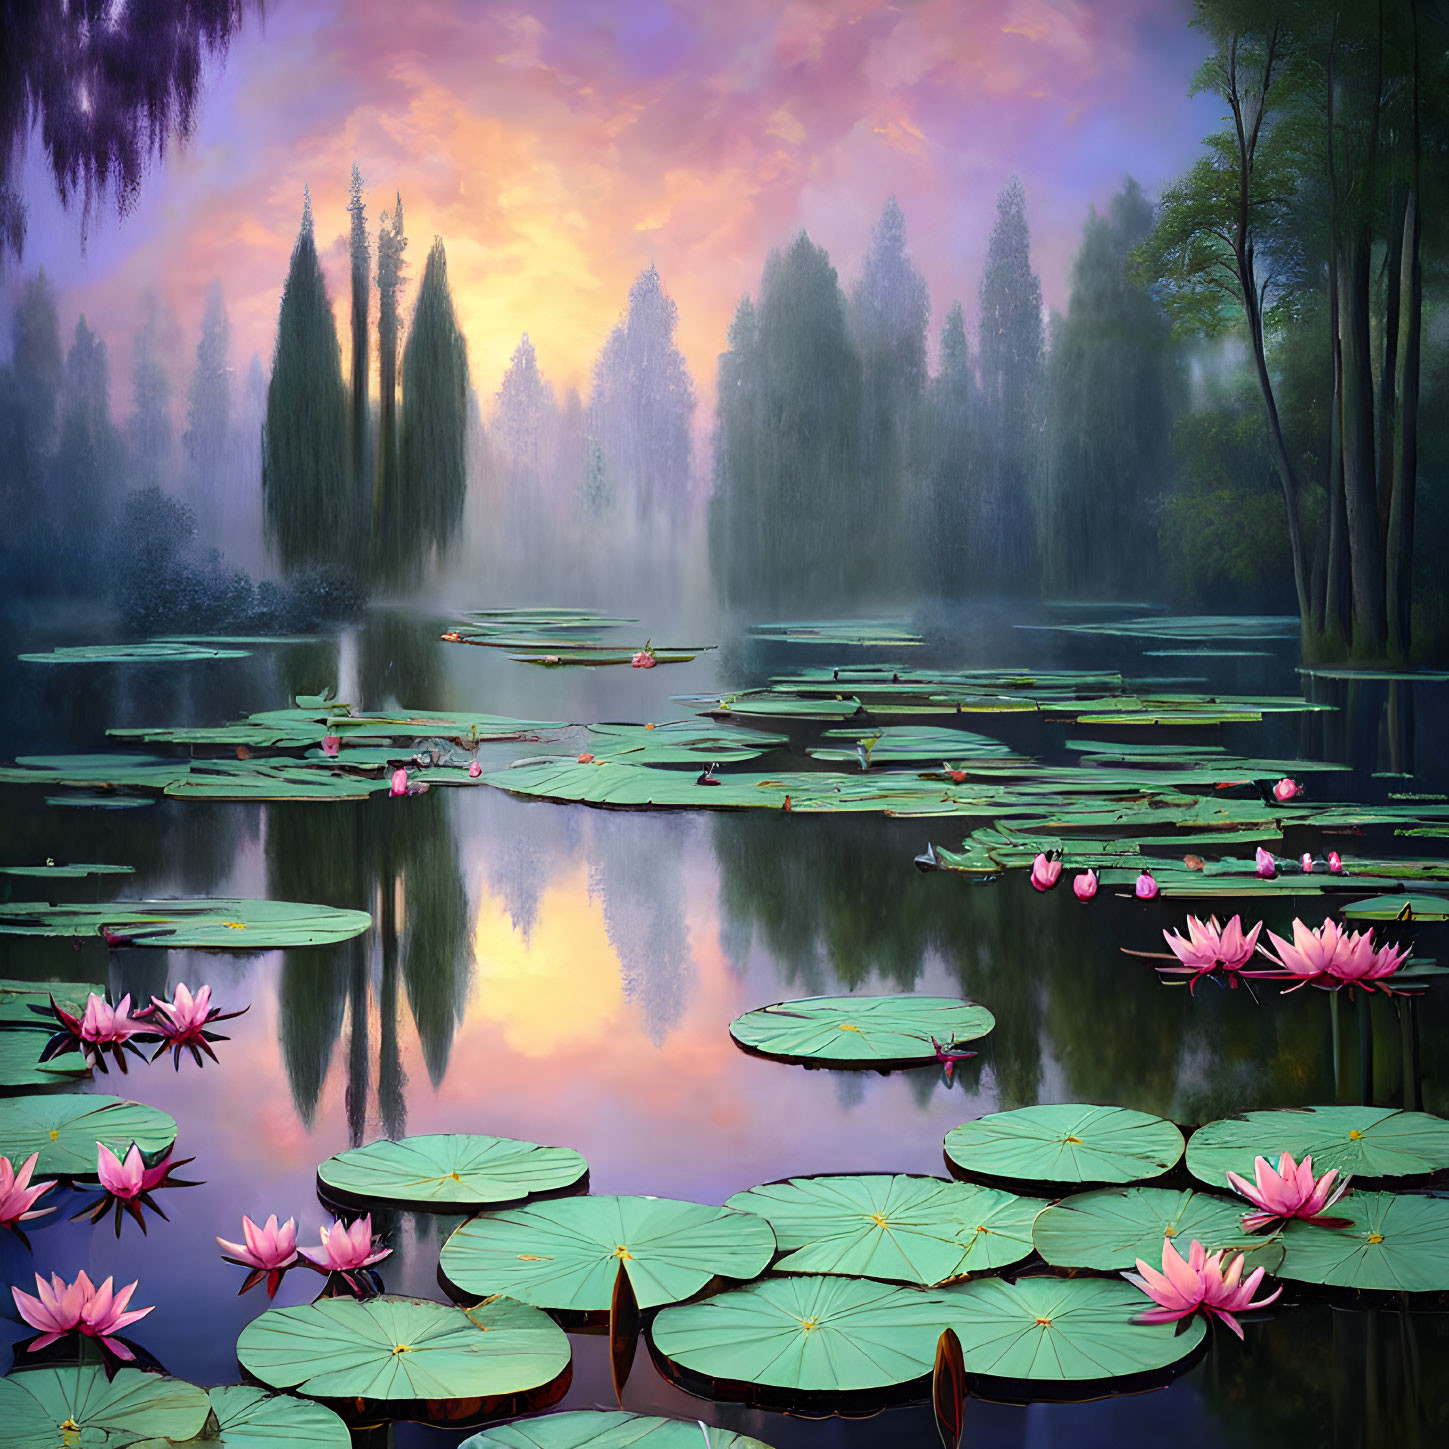 Lily and lotus flower in European 